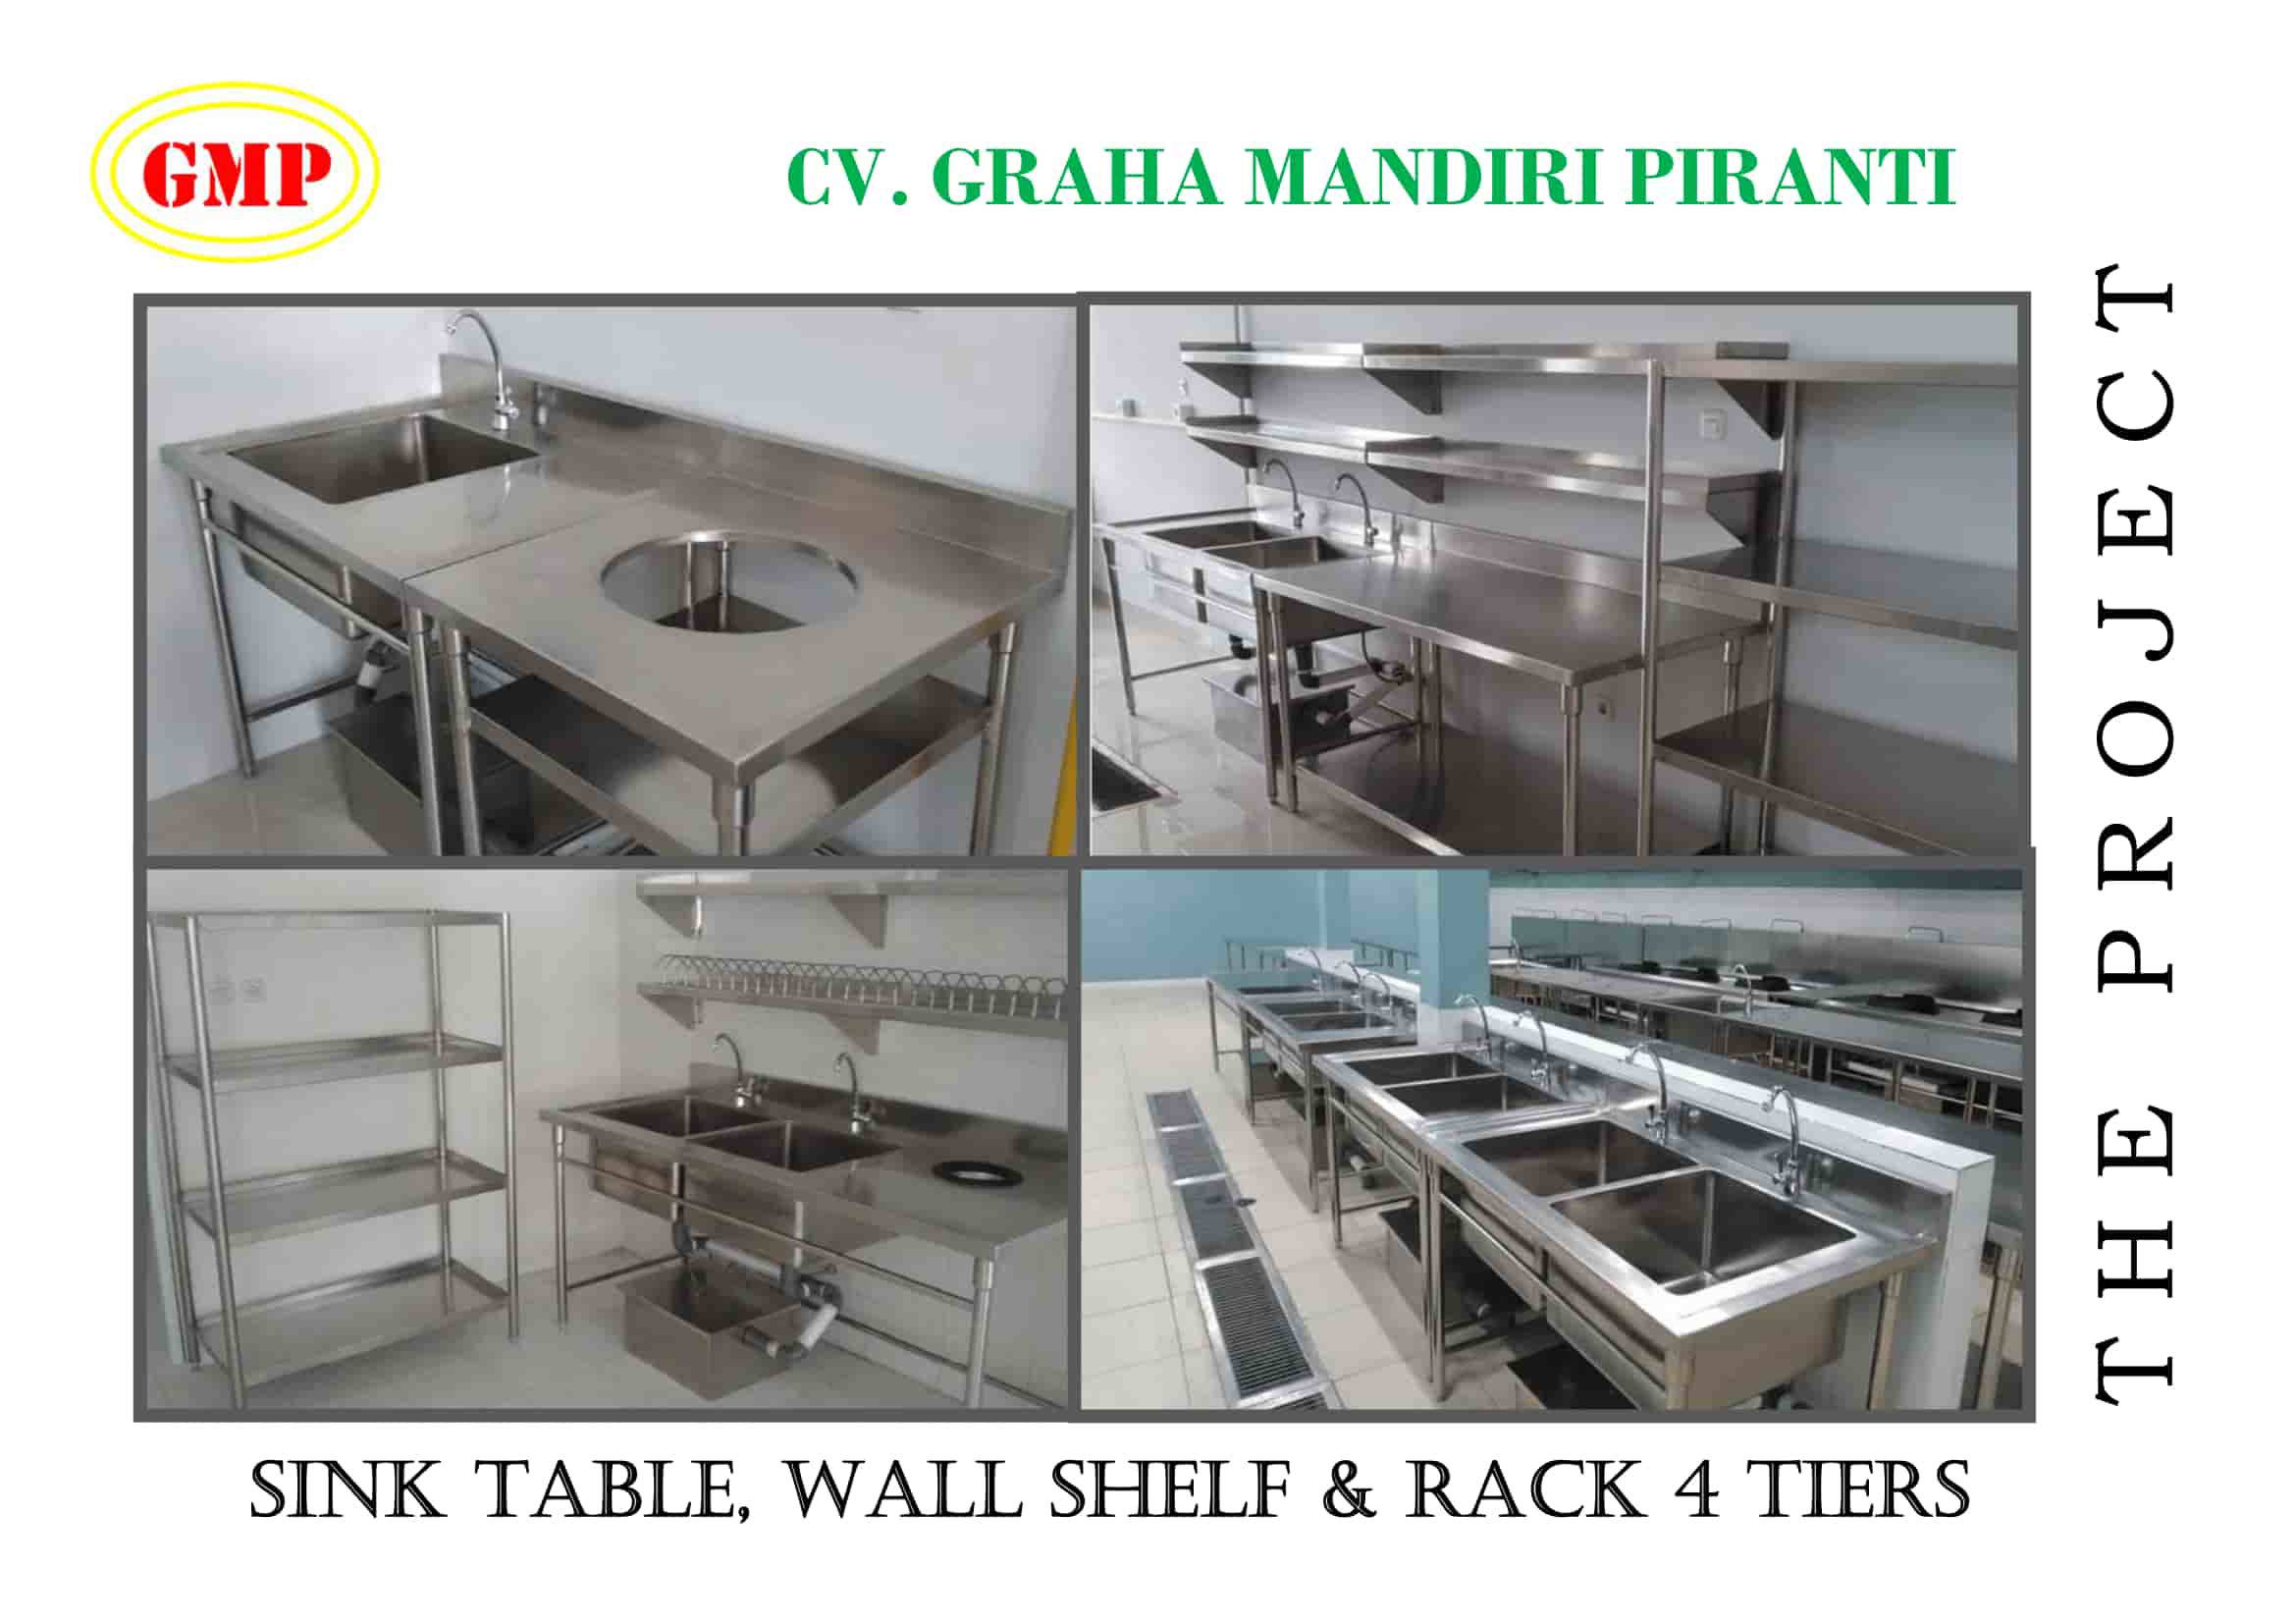 gmpstainless-project-sink-table-wall-shelf-rack-4-tiers